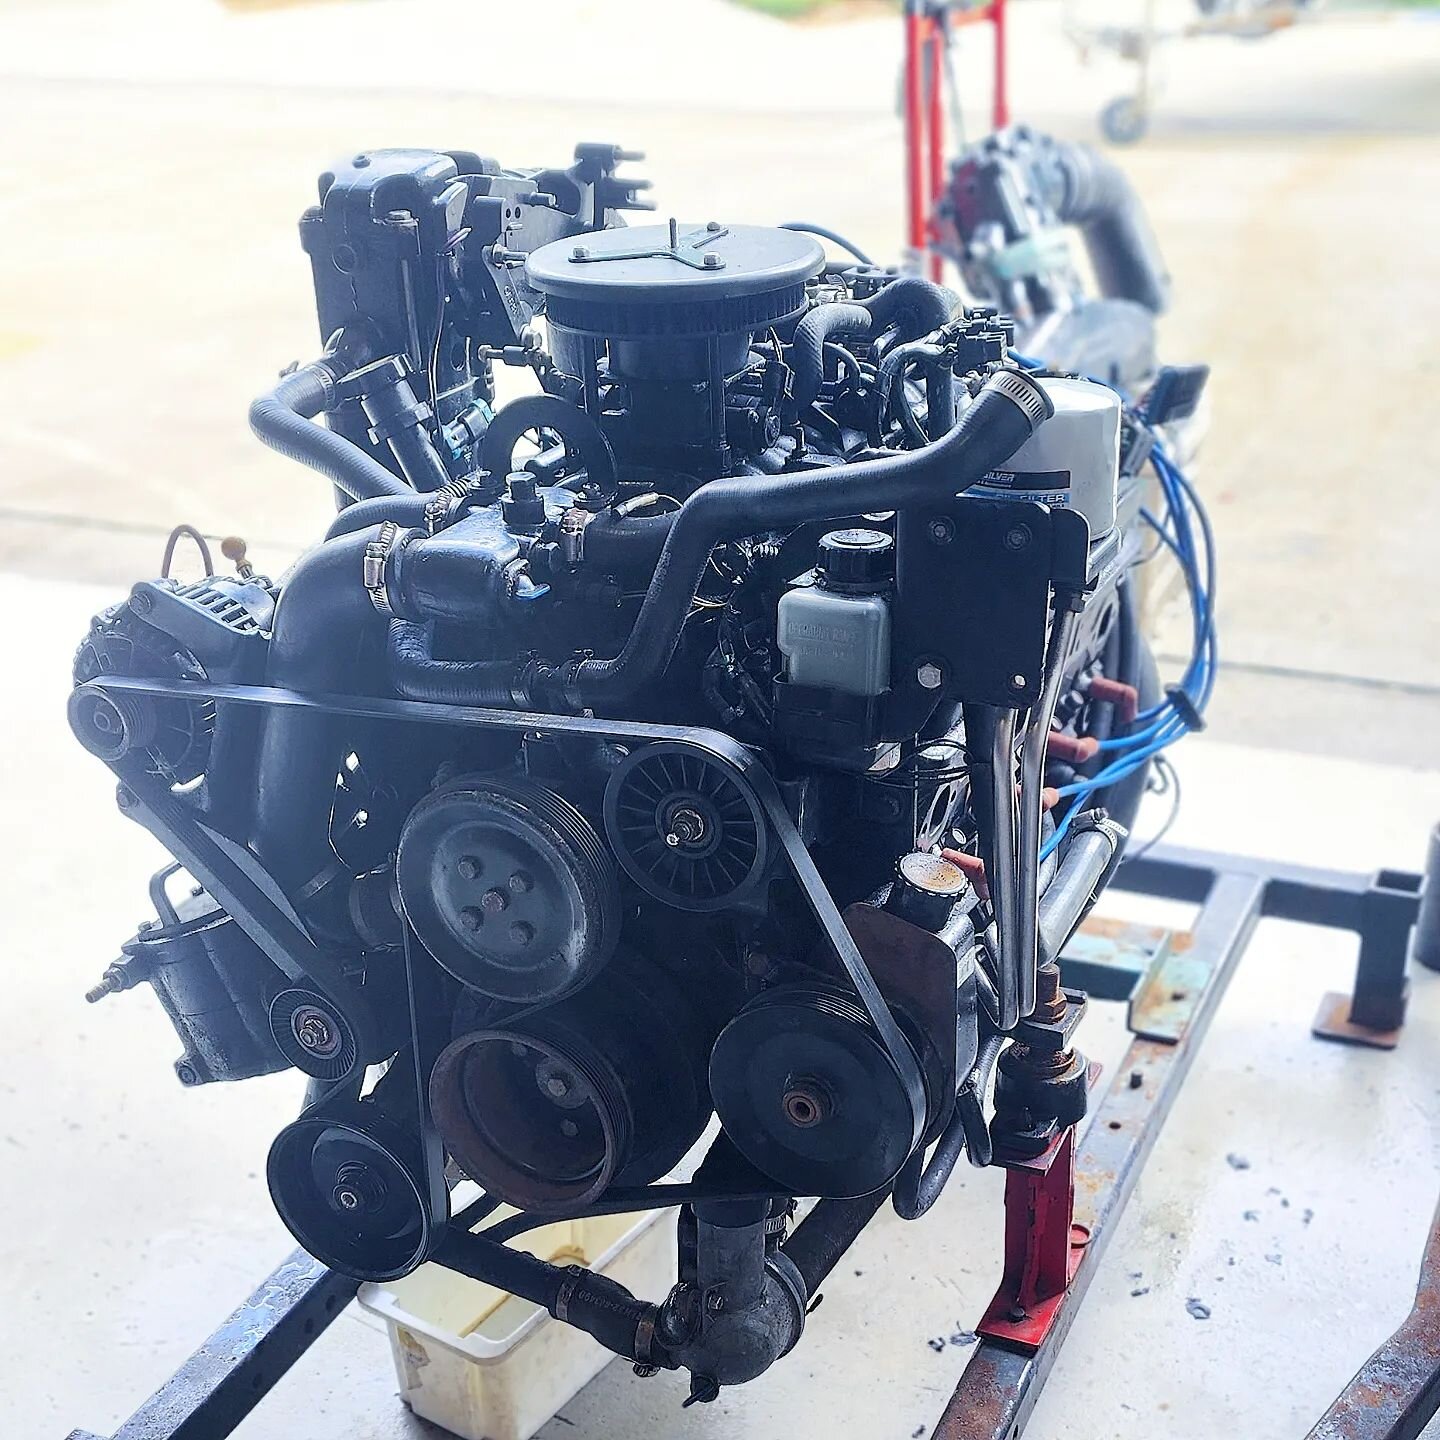 Happy Monday, friends!!!
We have a busy week planned, but to kick it off, we have this 5.7 Mercruiser engine out and back in to address an overheat issue 🛠 

💡Did you know we can help you with regular maintenance to keep your boat in optimal condit